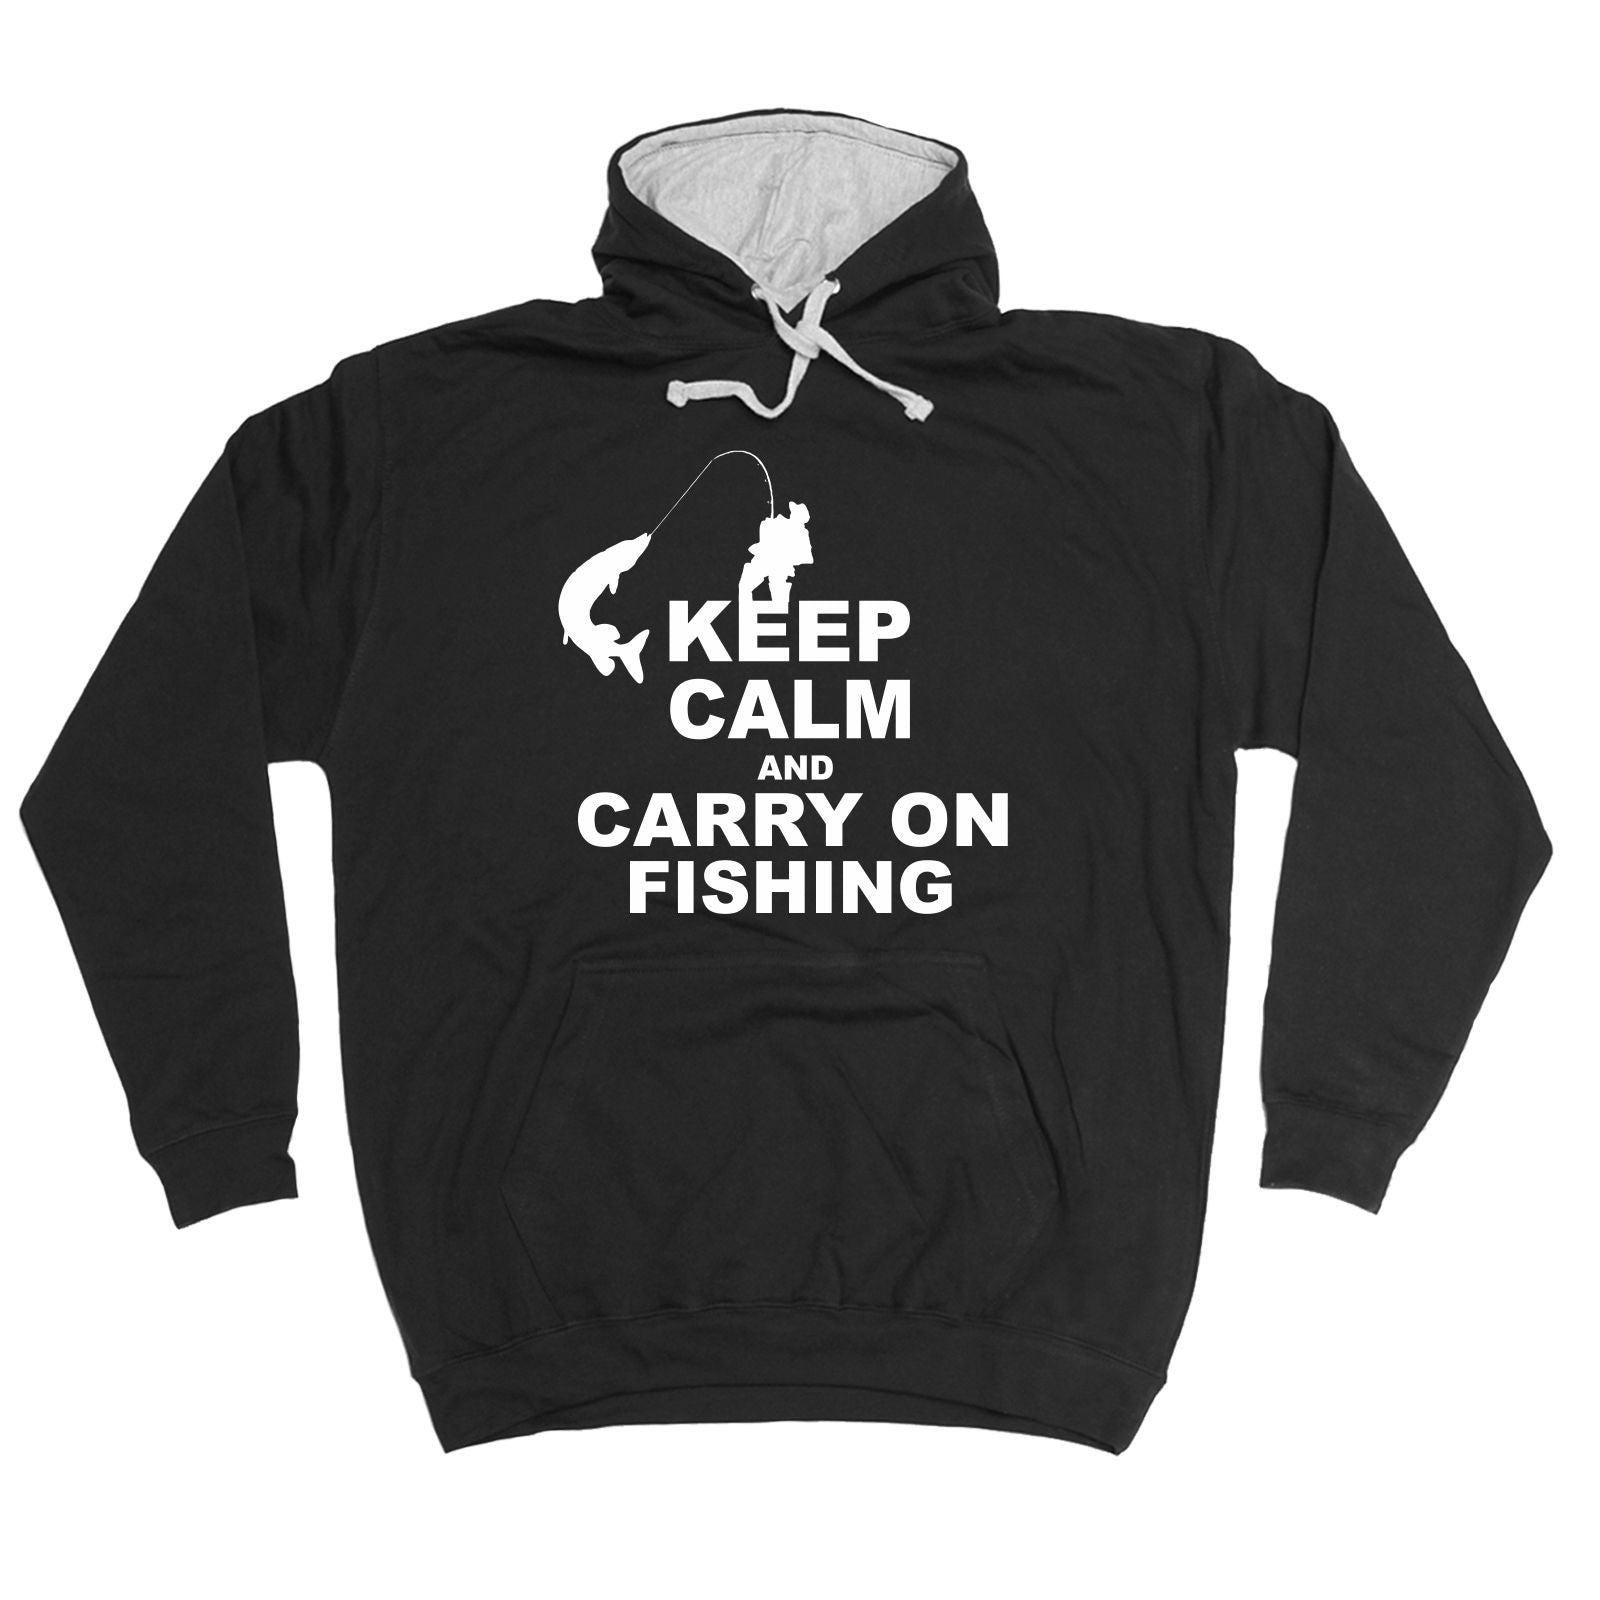 Buy 123t Keep Calm And Carry On Fishing Funny Hoodie at 123t UK - T ...